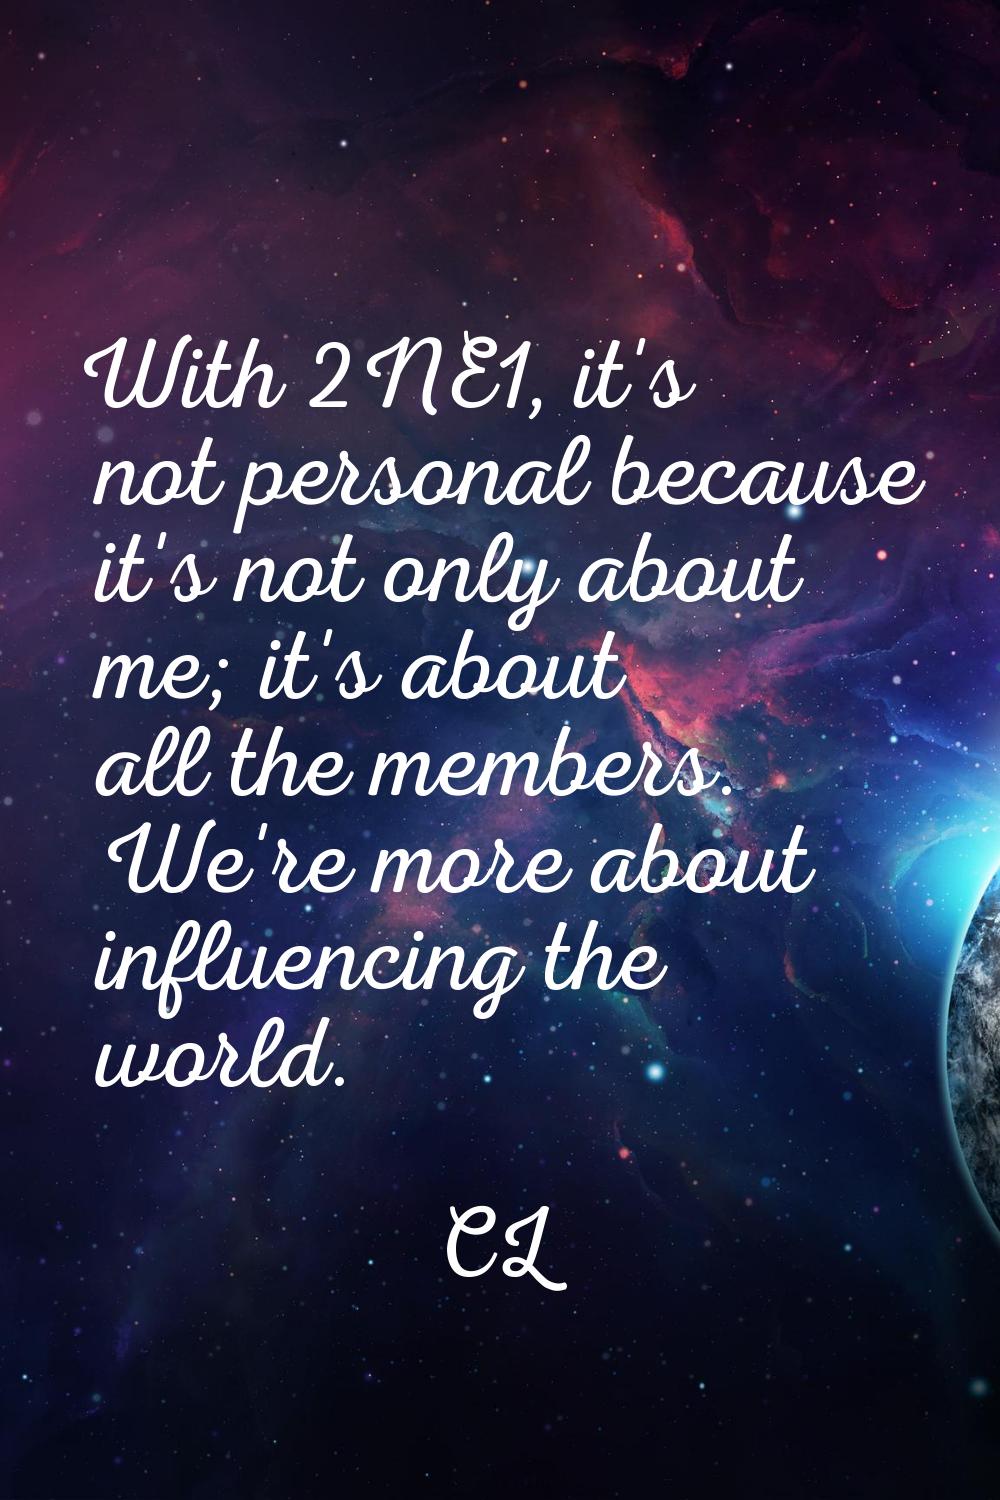 With 2NE1, it's not personal because it's not only about me; it's about all the members. We're more